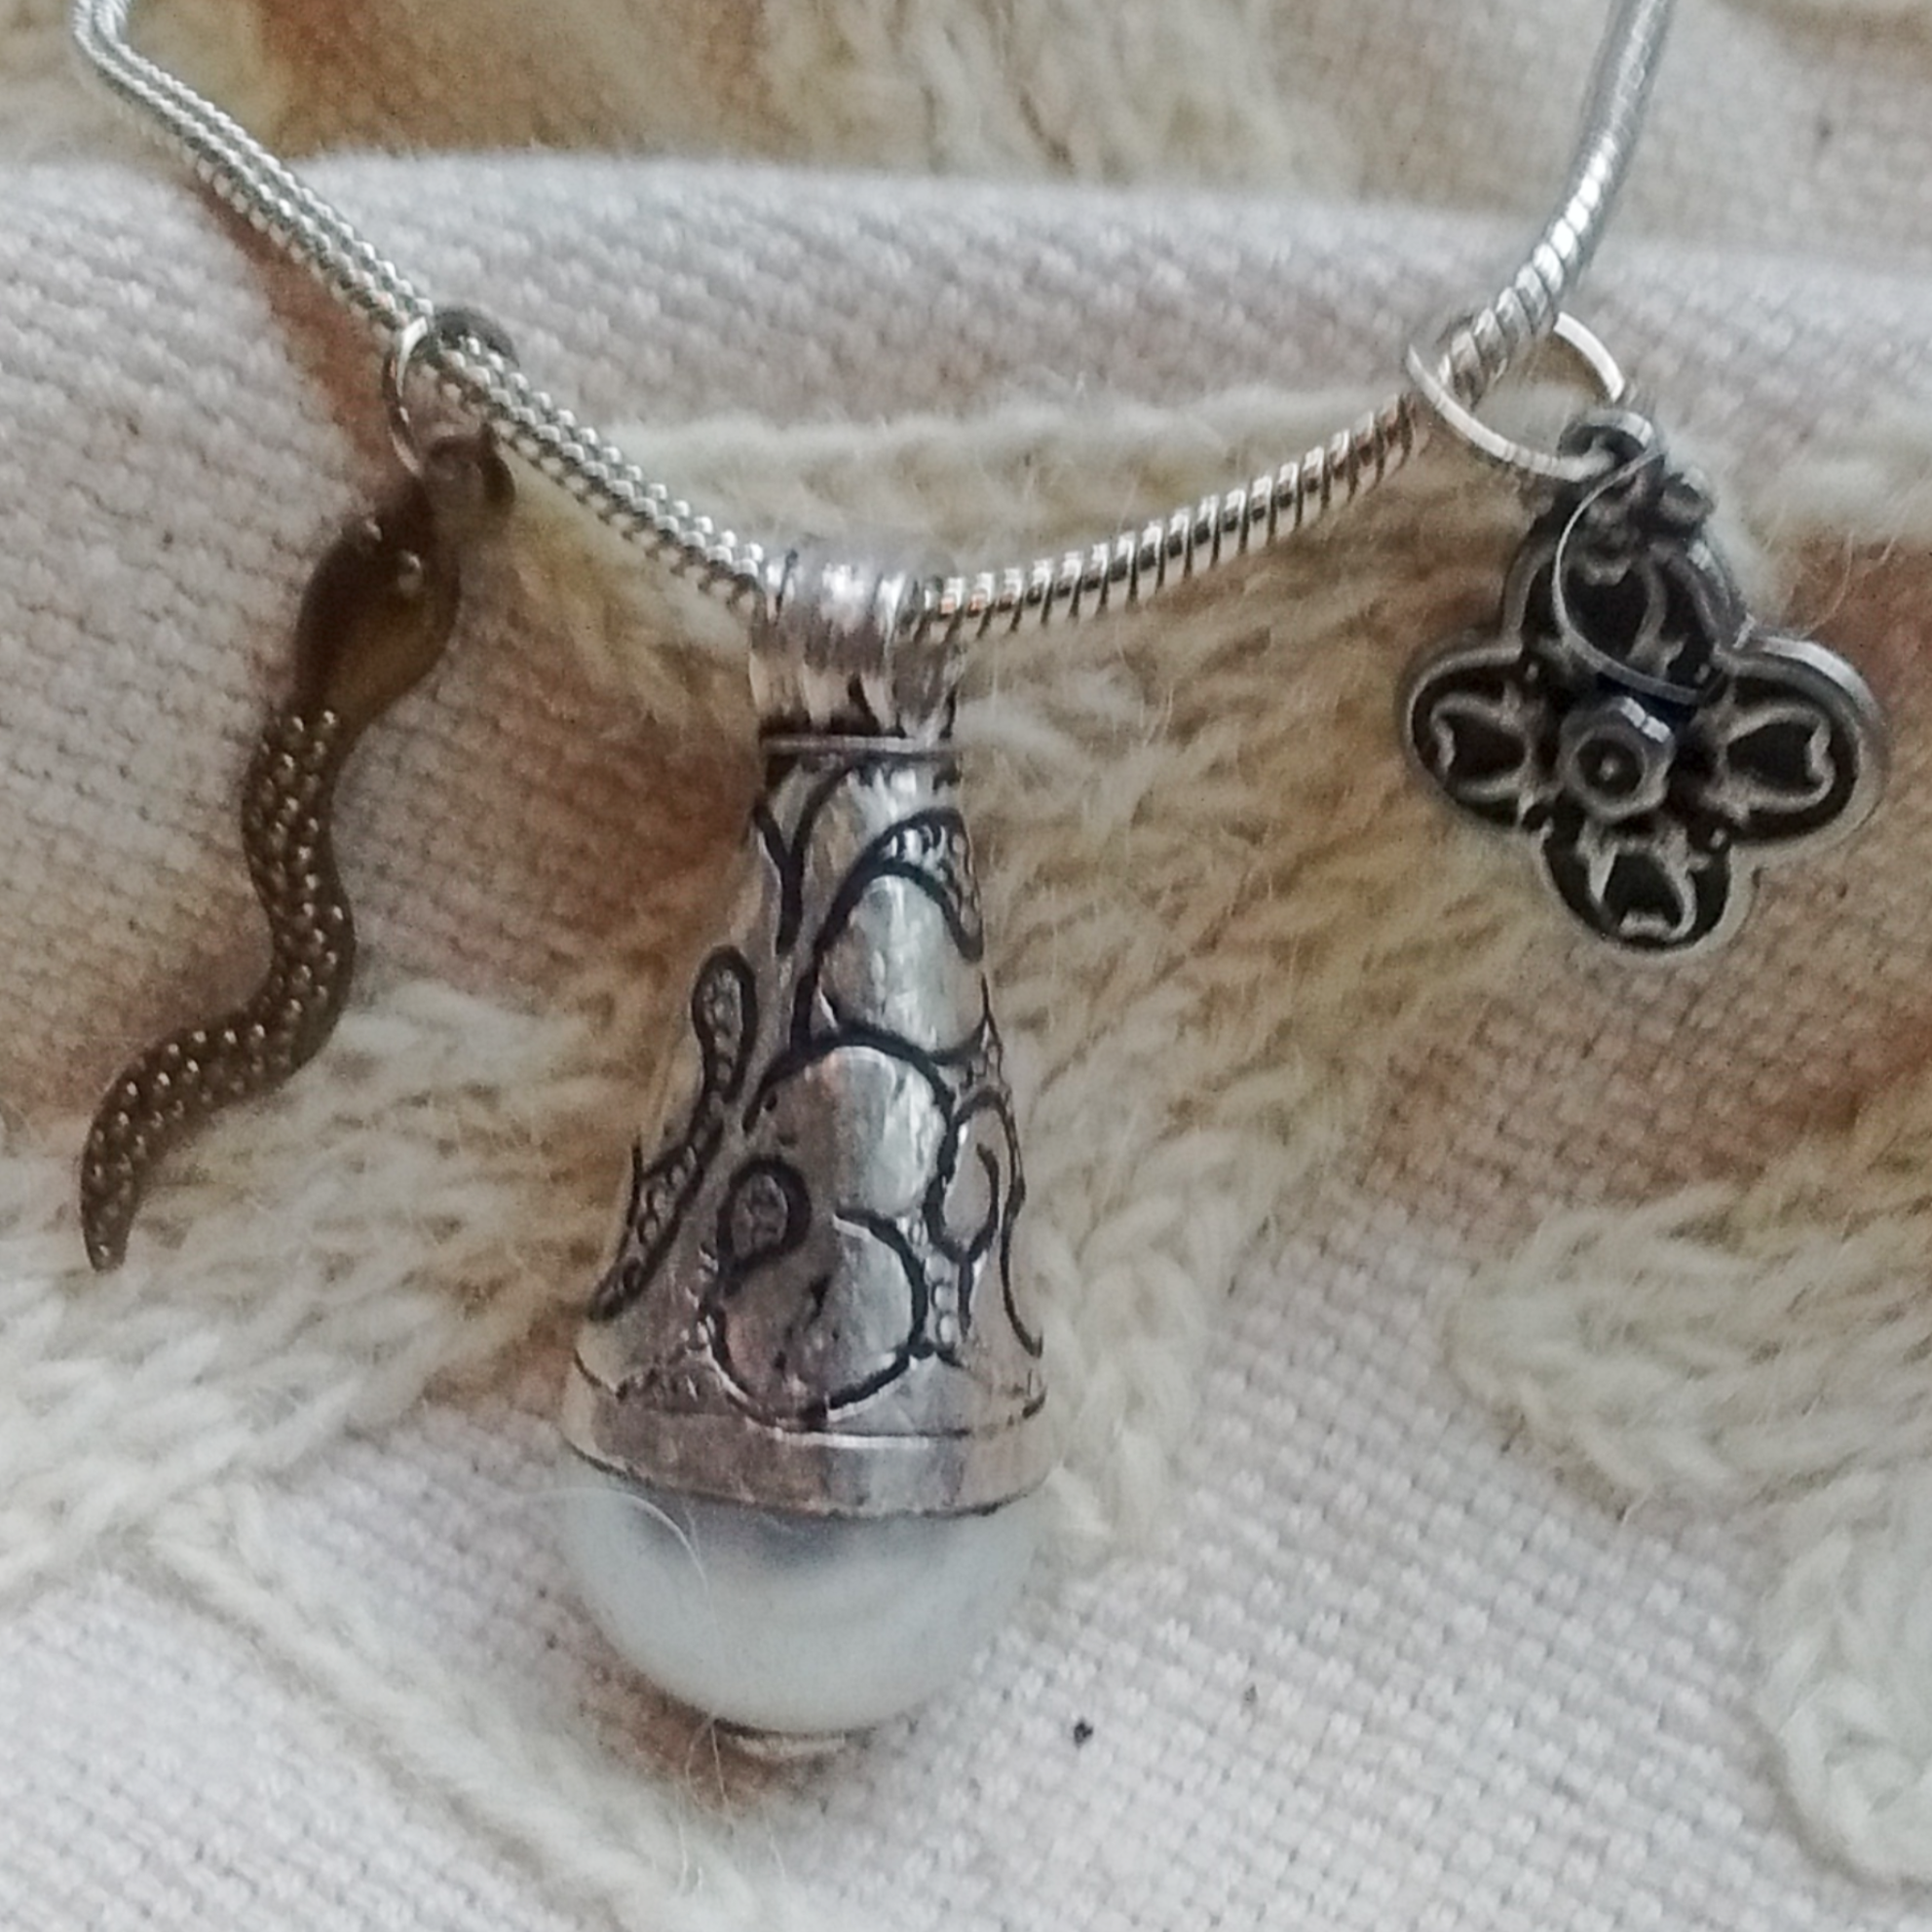 Cool Mind Talisman Necklace - Sterling and Tibetan Silver